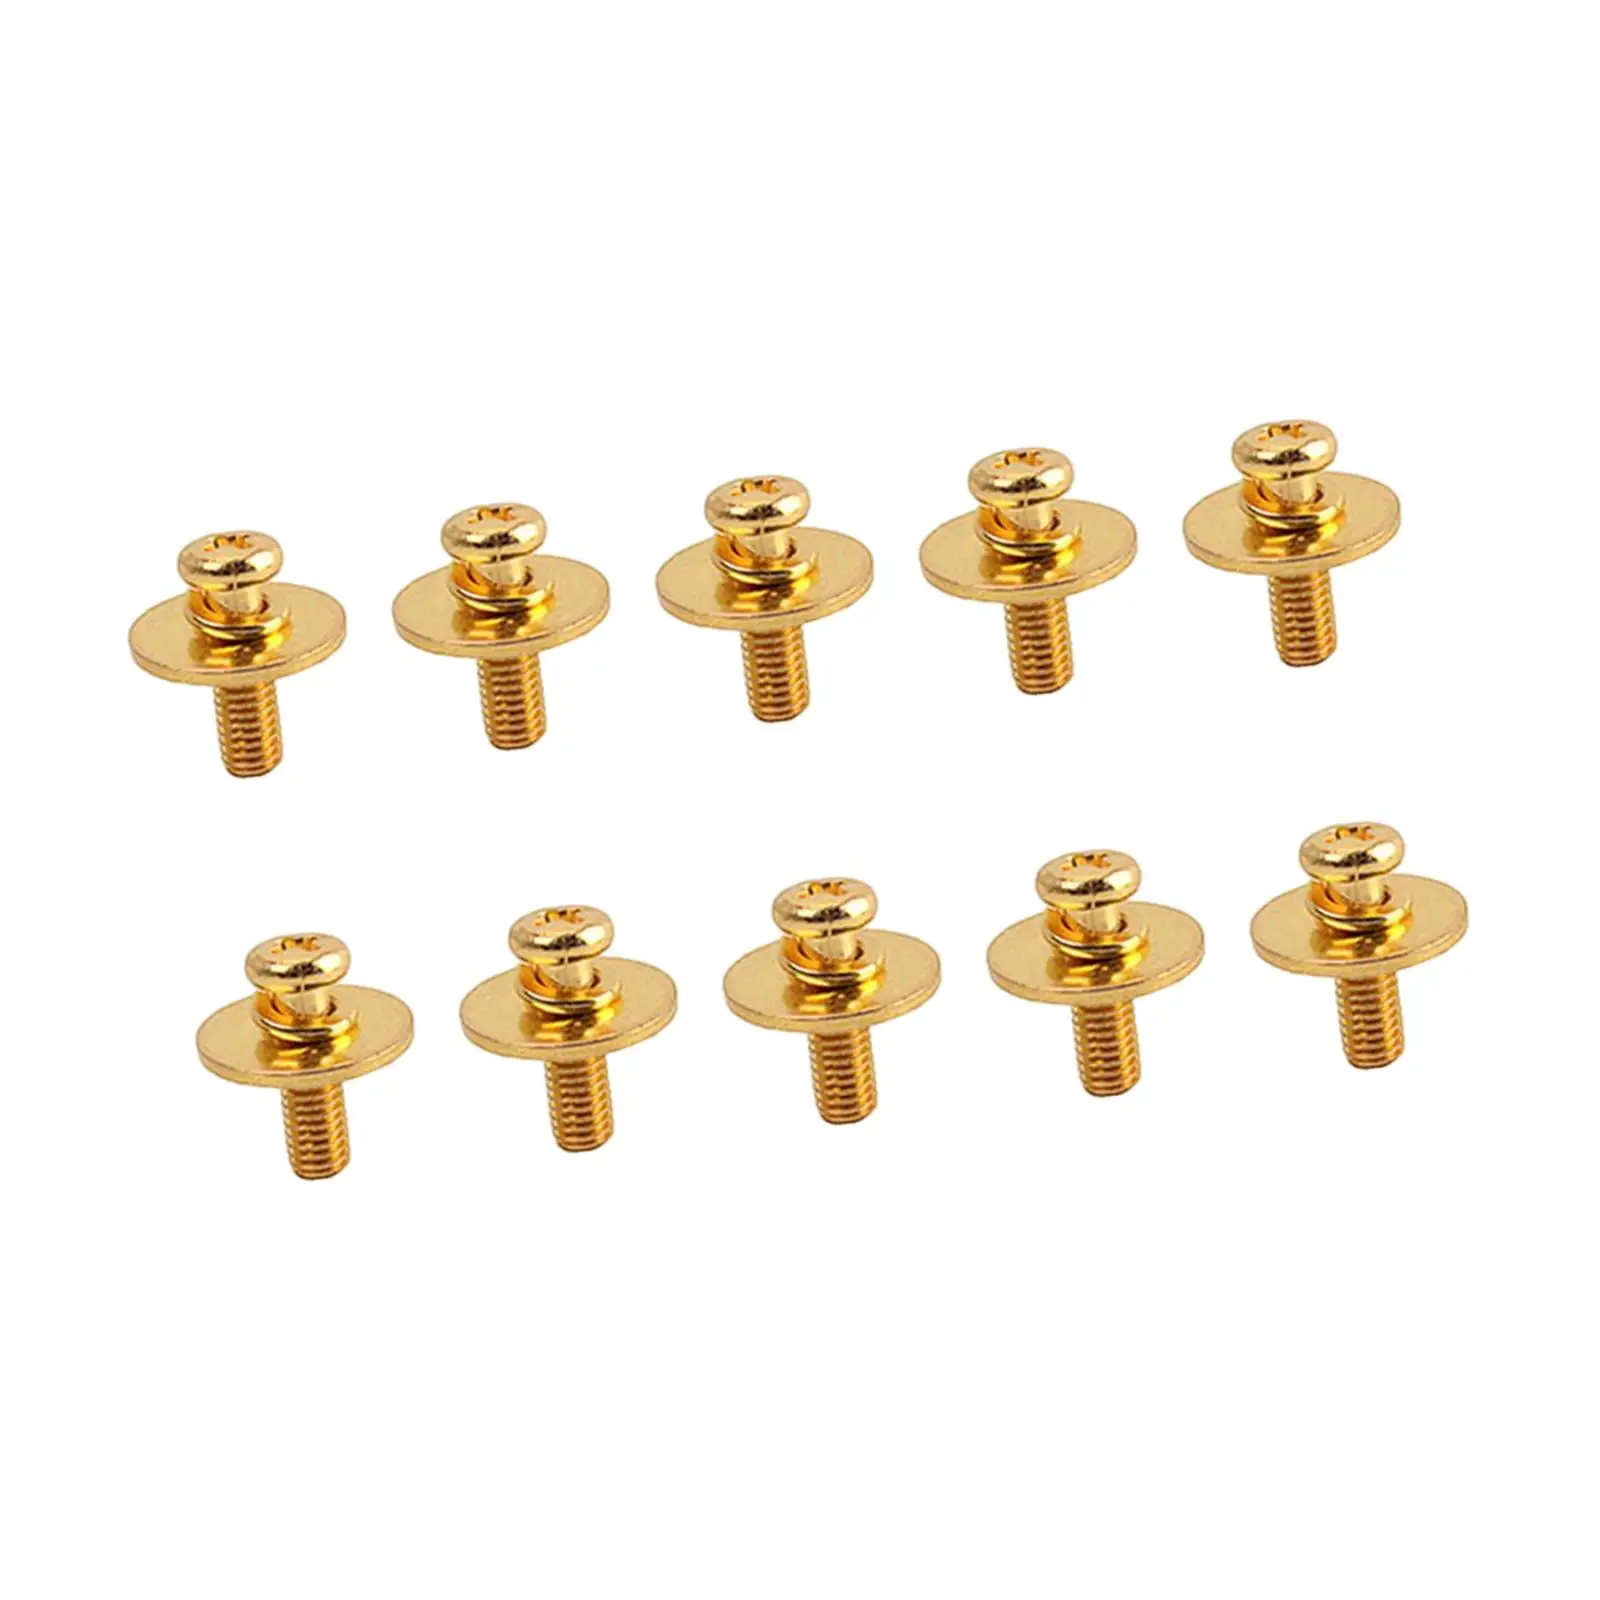 Metal Drum Lug Screws Drum Screw Drum Accessory Lug Claw Hook Snare Drum Lugs for Percussion Instrument Accessories Replacement